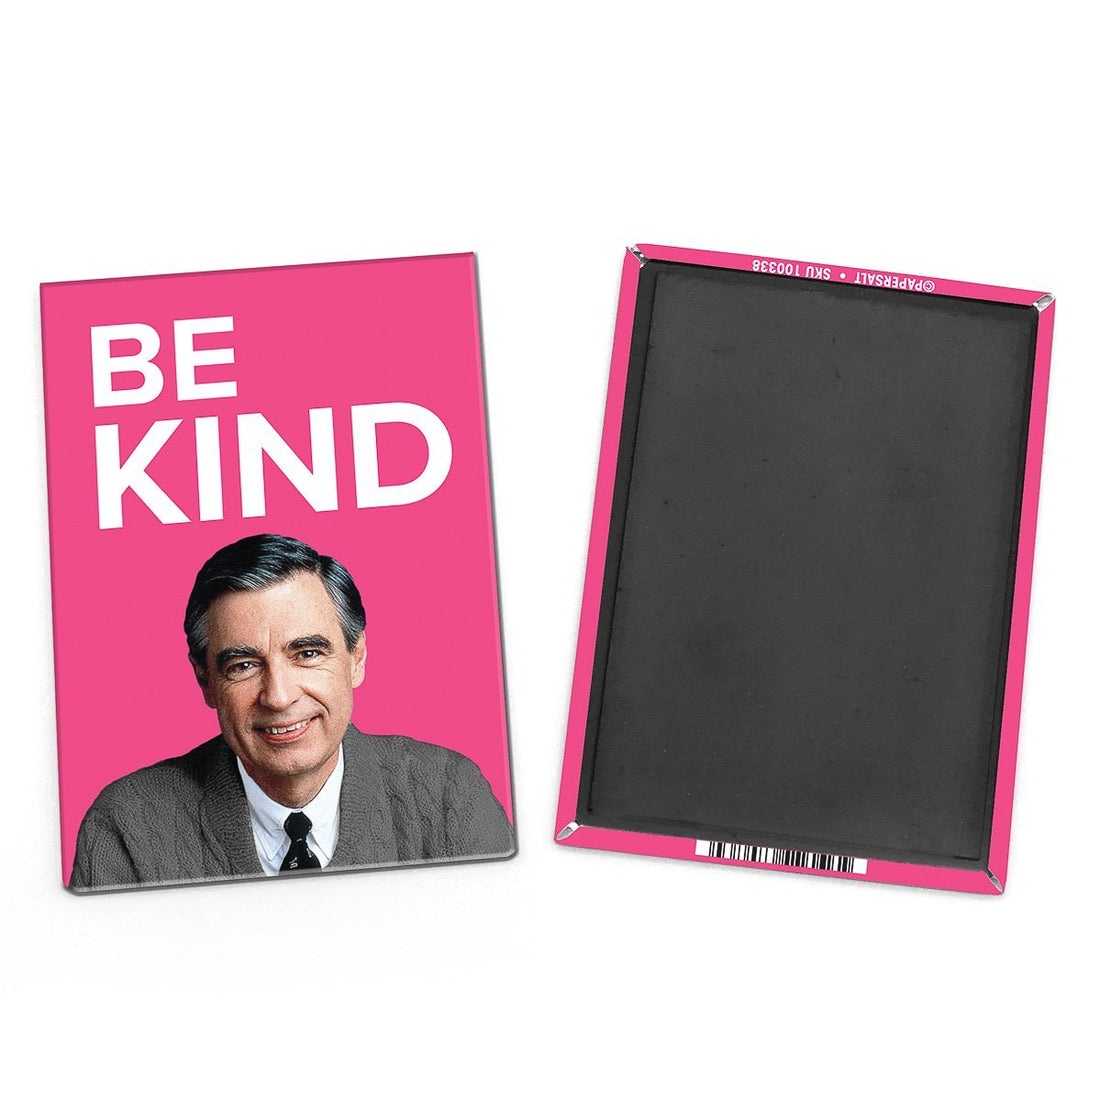 Mister Rogers Inspirational Quote Magnet: "Be Kind"